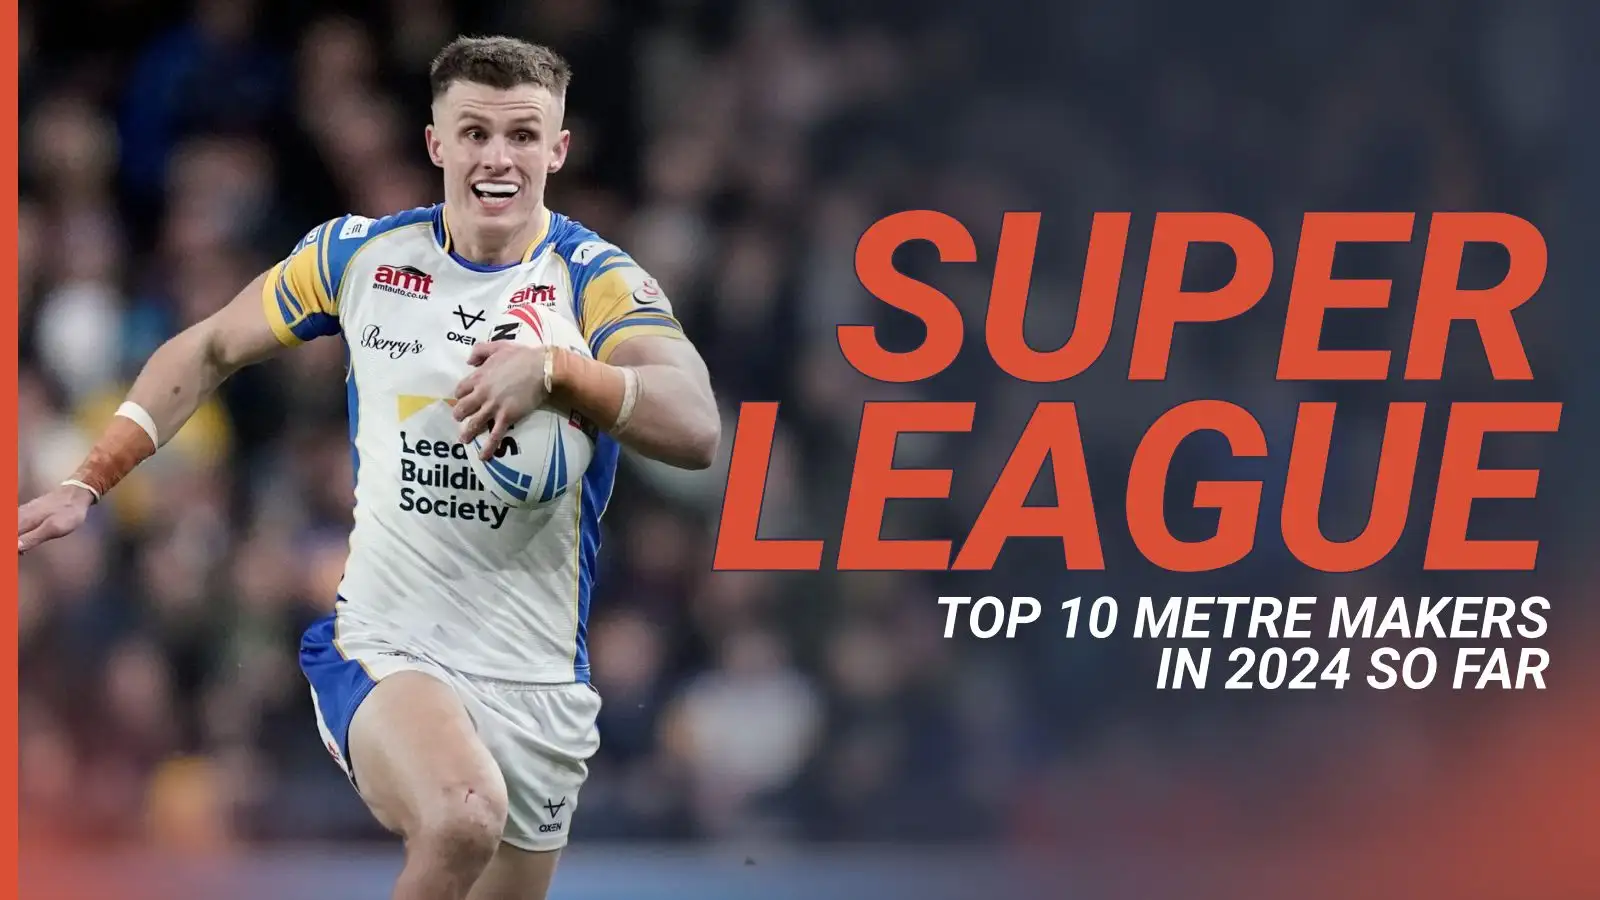 Ranking the top 10 metre makers in Super League so far in 2024